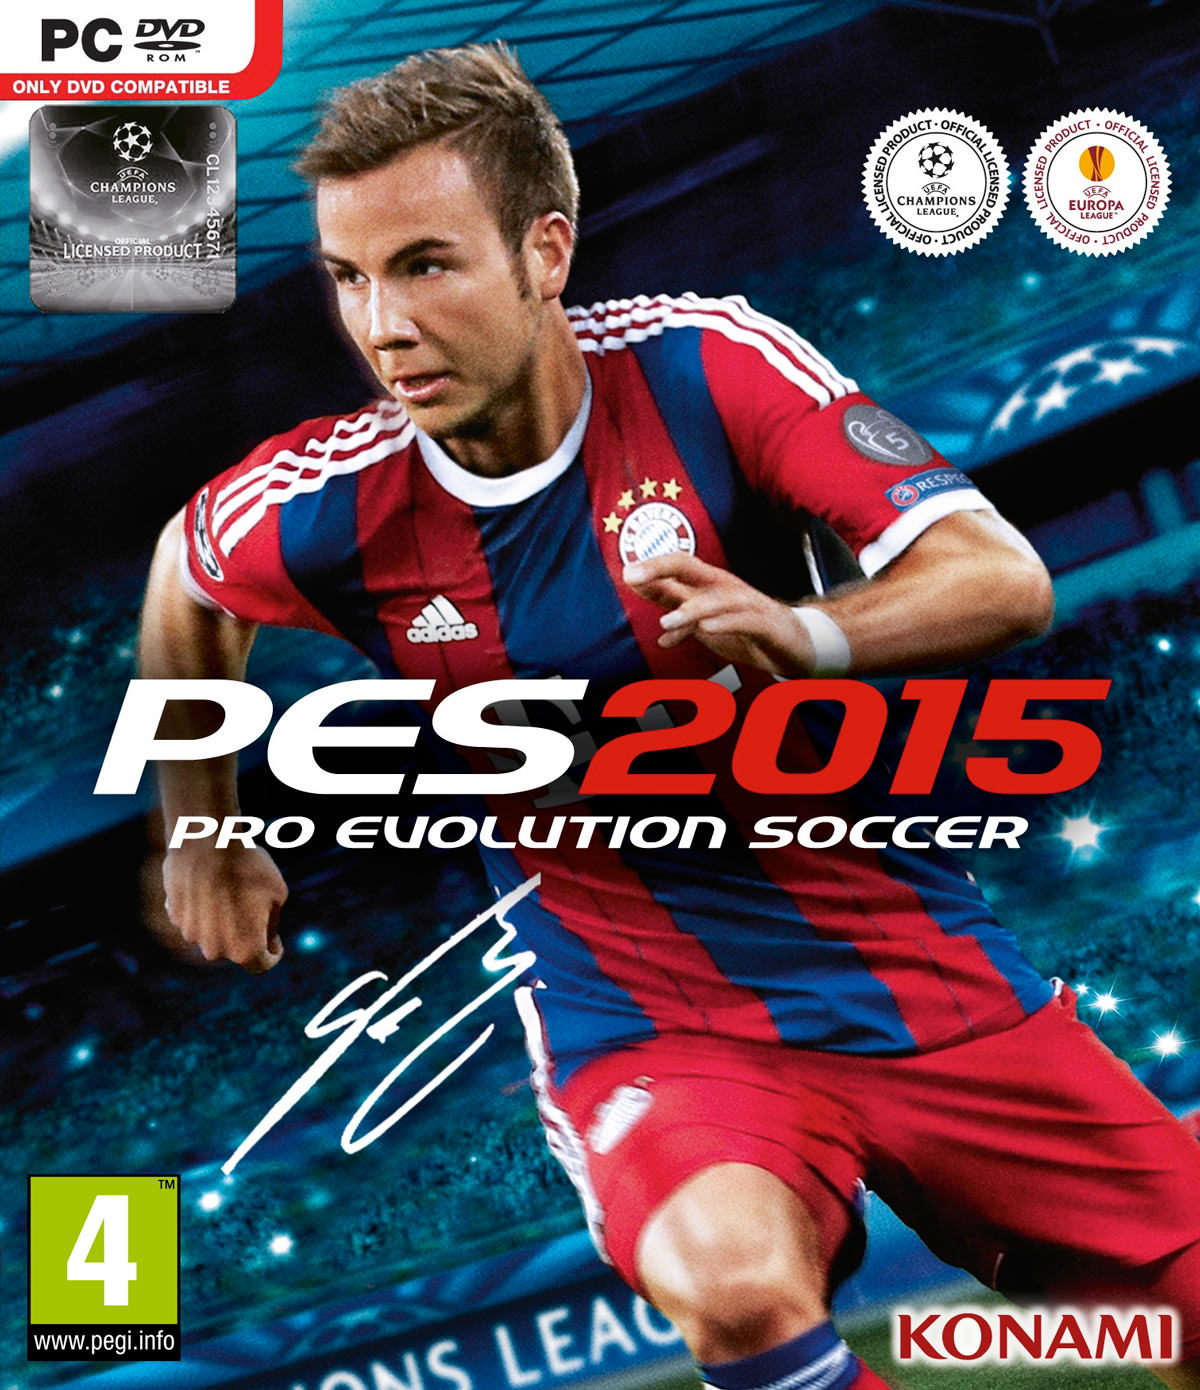 http://www.fifplay.com/images/public/pes-2015-cover-pc.jpg